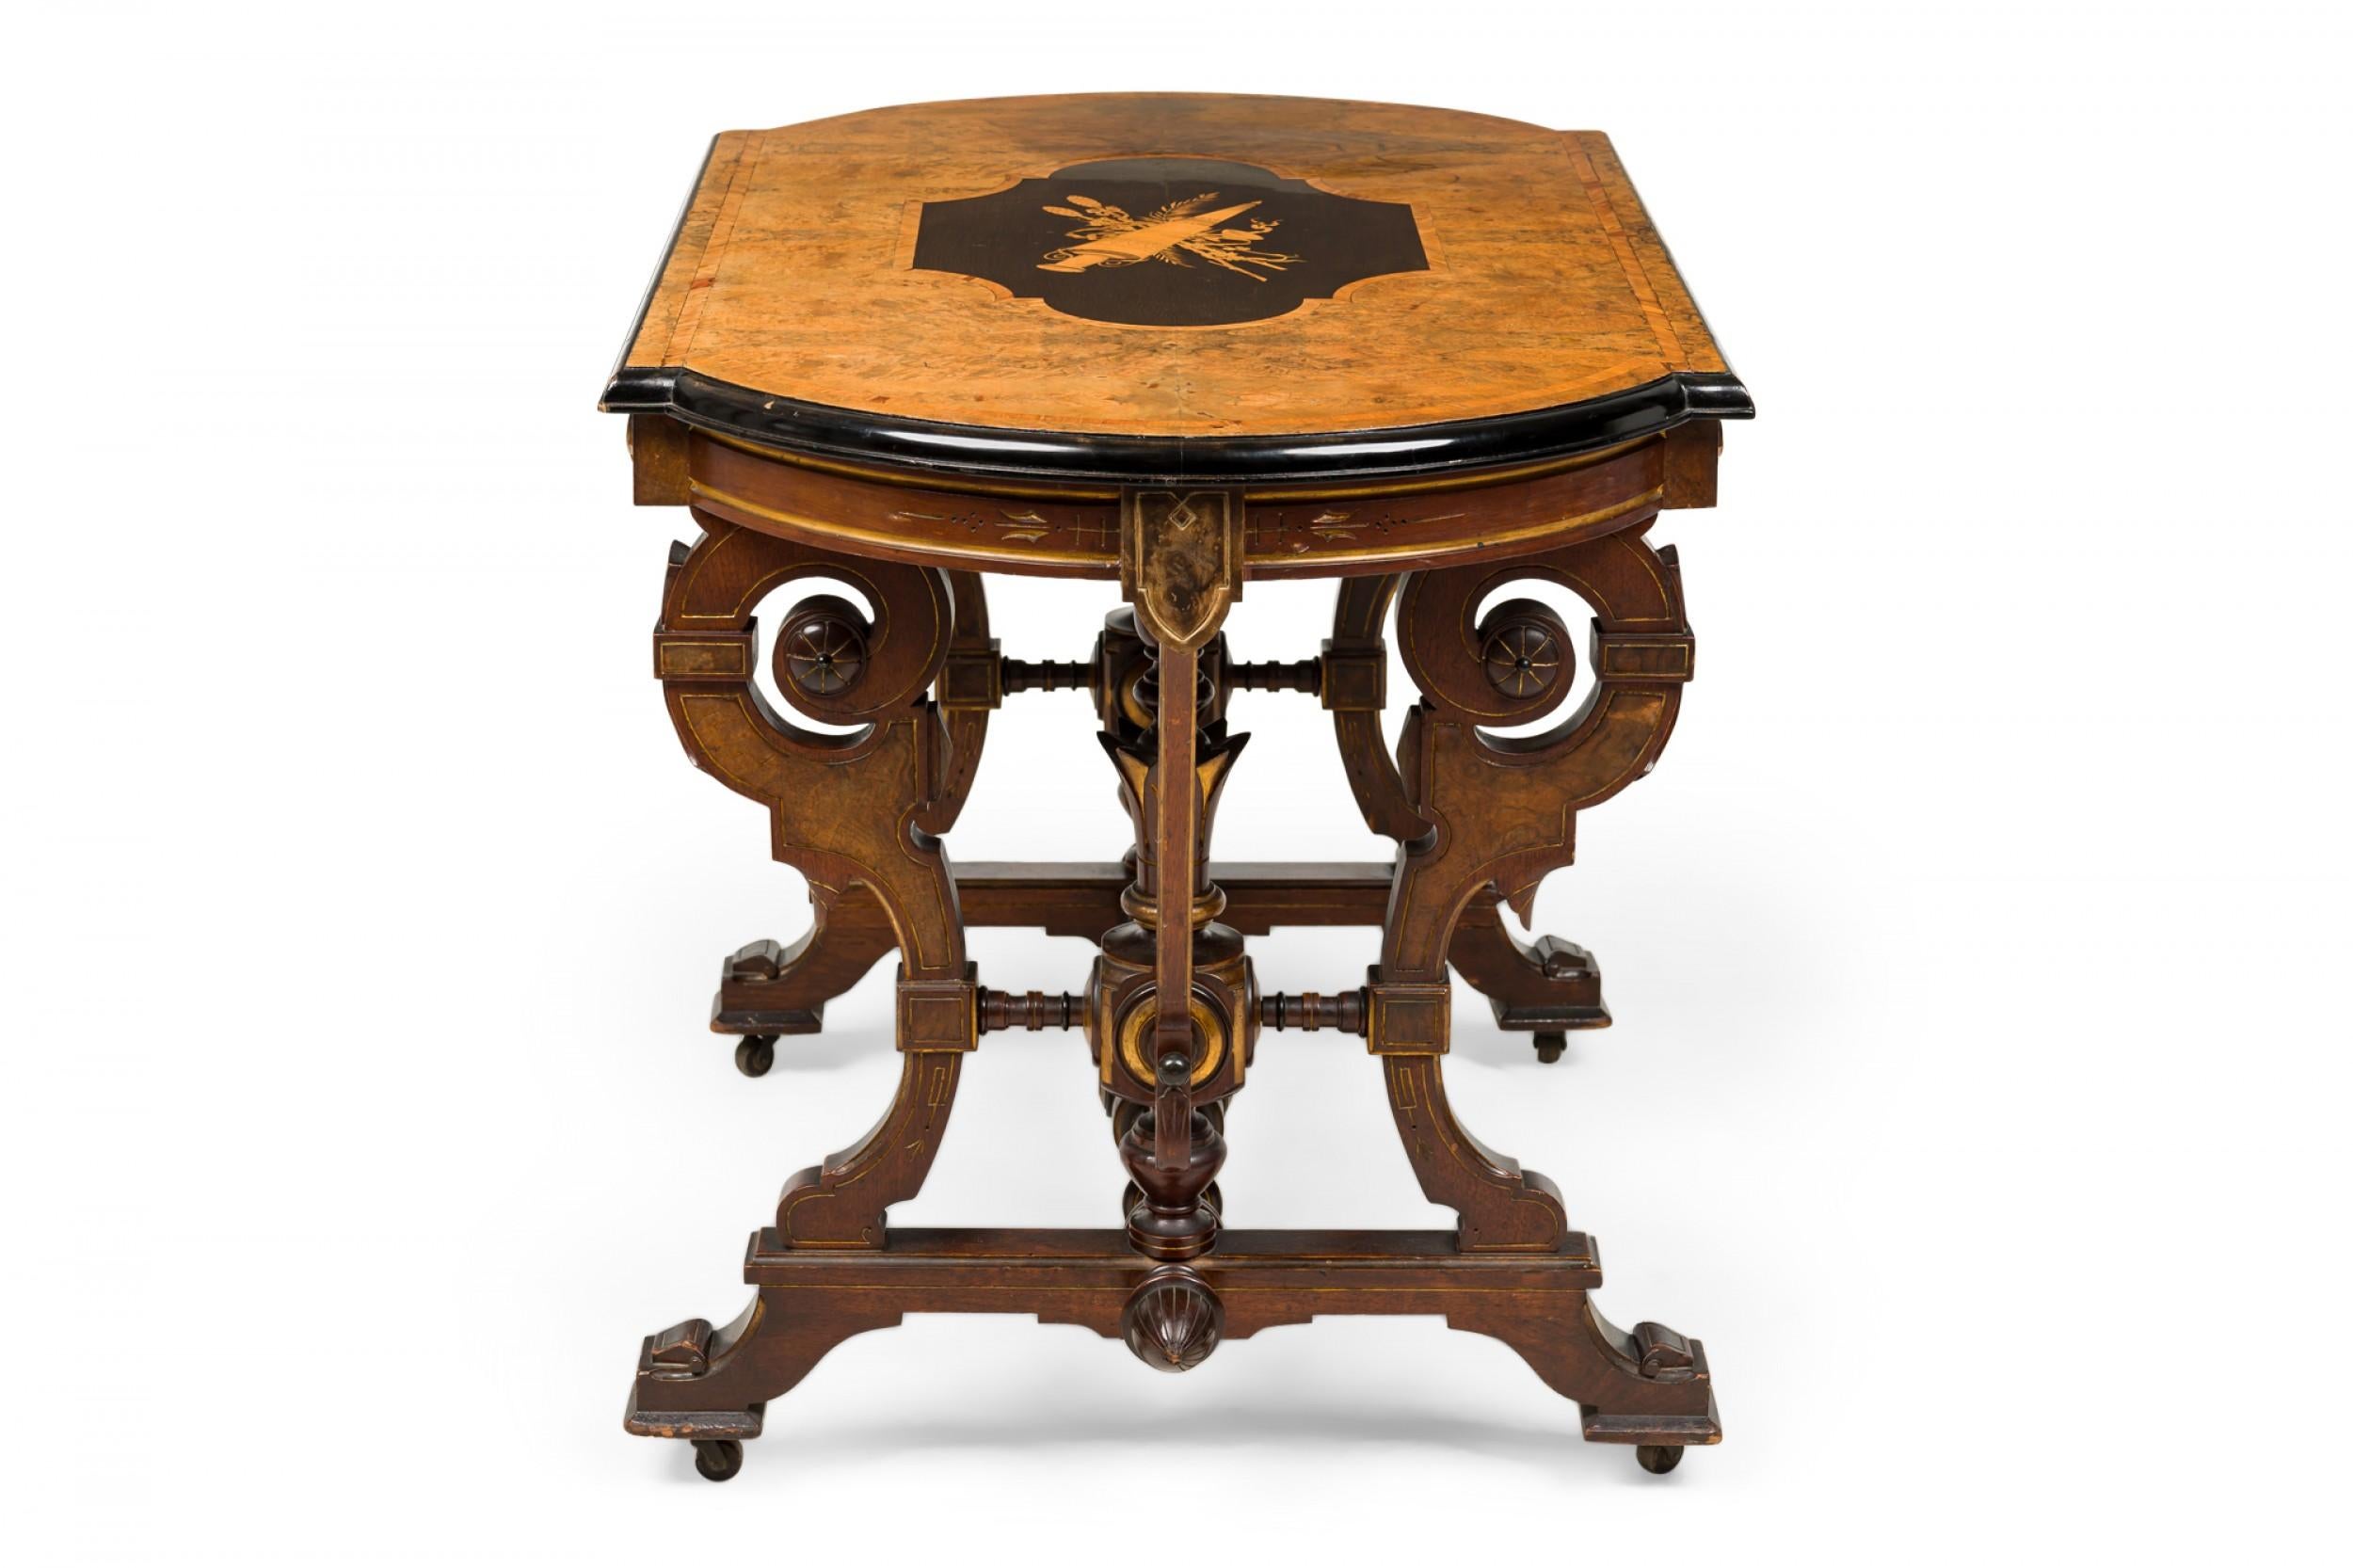 19th Century American Victorian Mahogany Inlaid Center Table with Elaborate Scrollwork For Sale